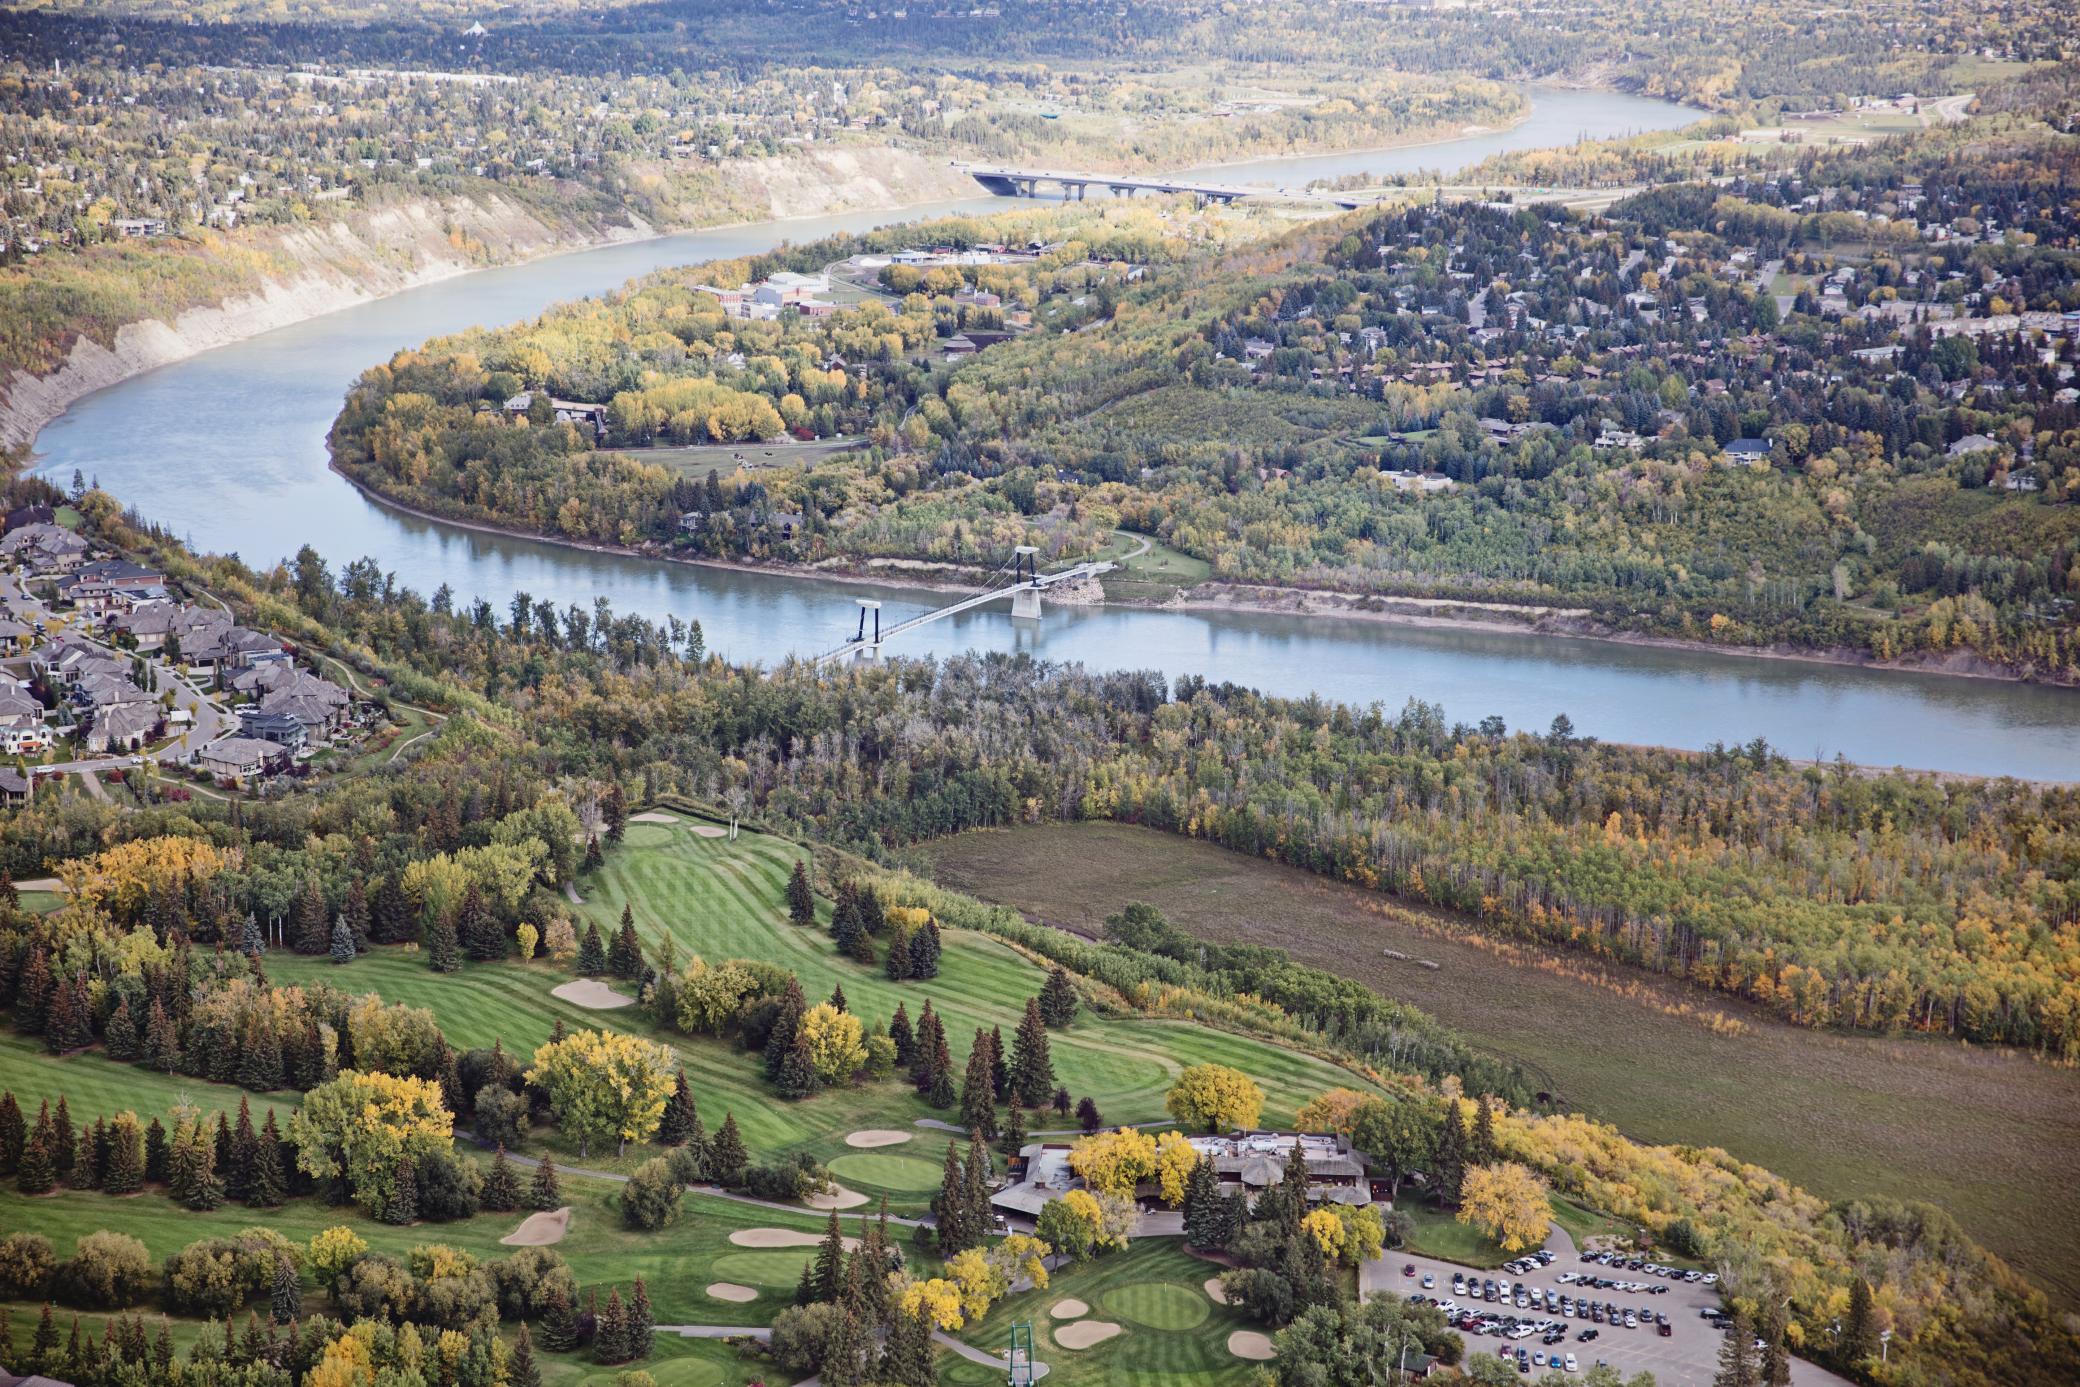 Arial photo of river with surrounding trees and land